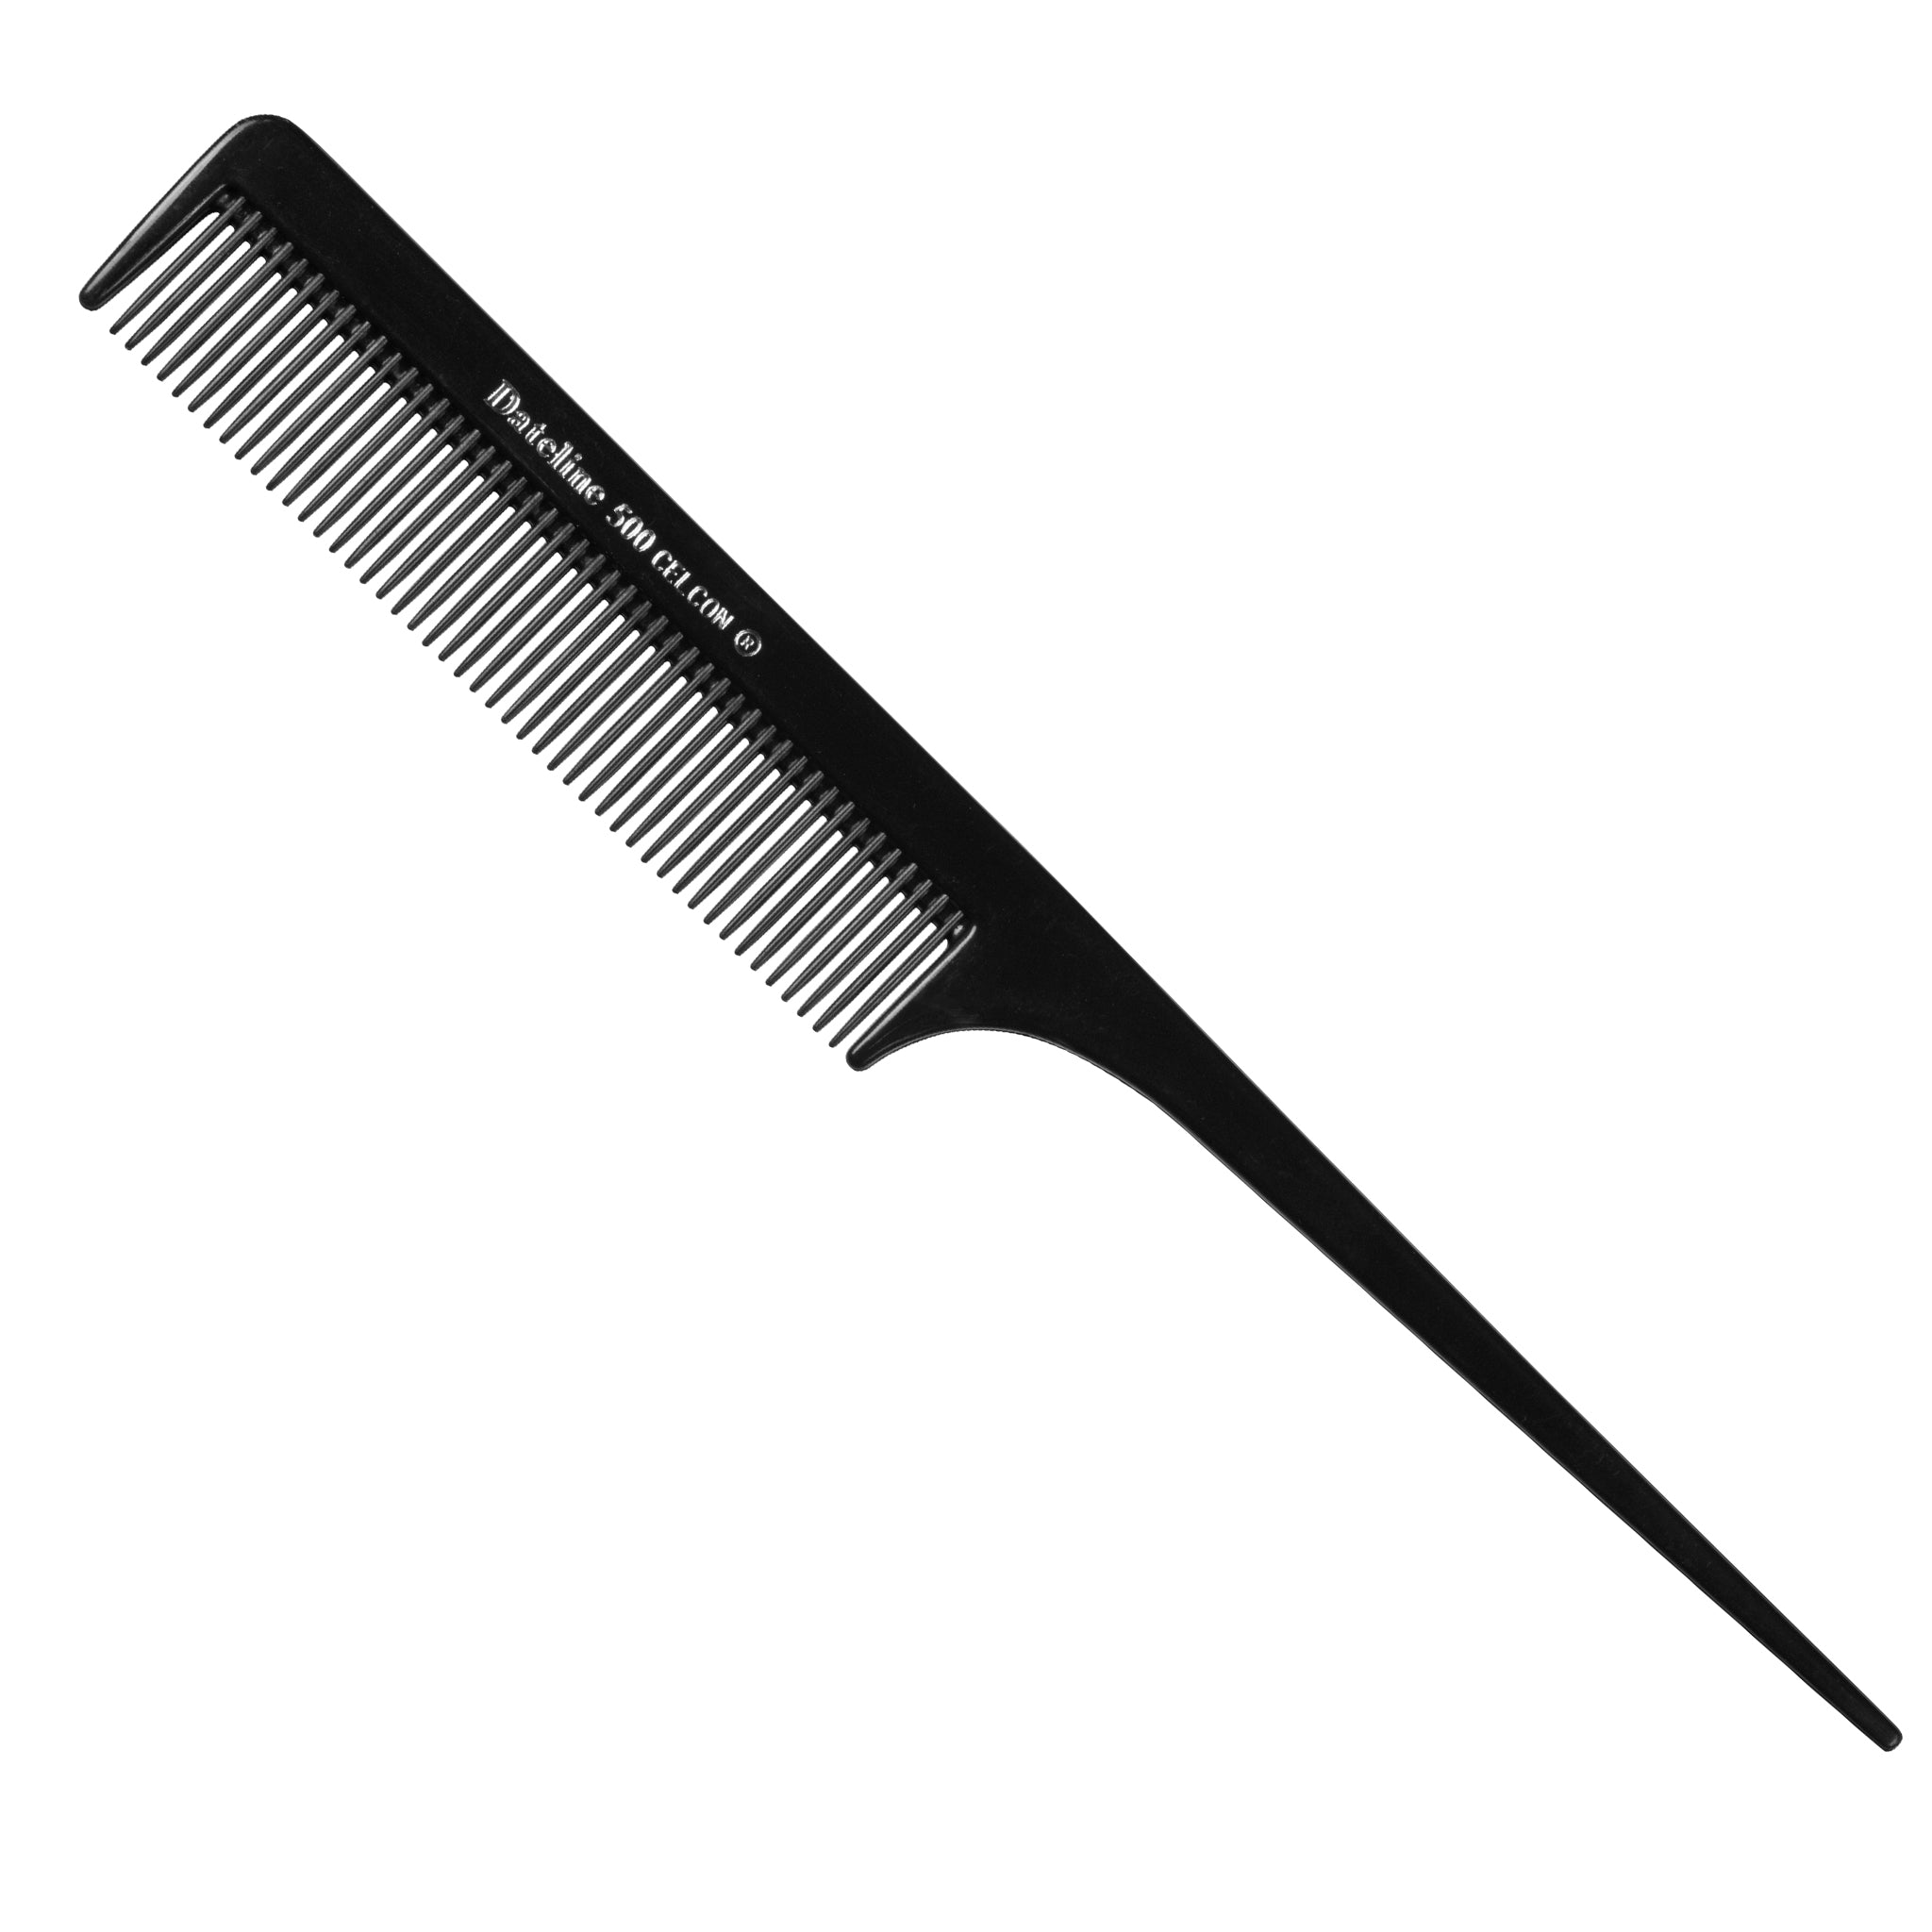 Black Celcon Tail Comb 500 - Plastic Pins